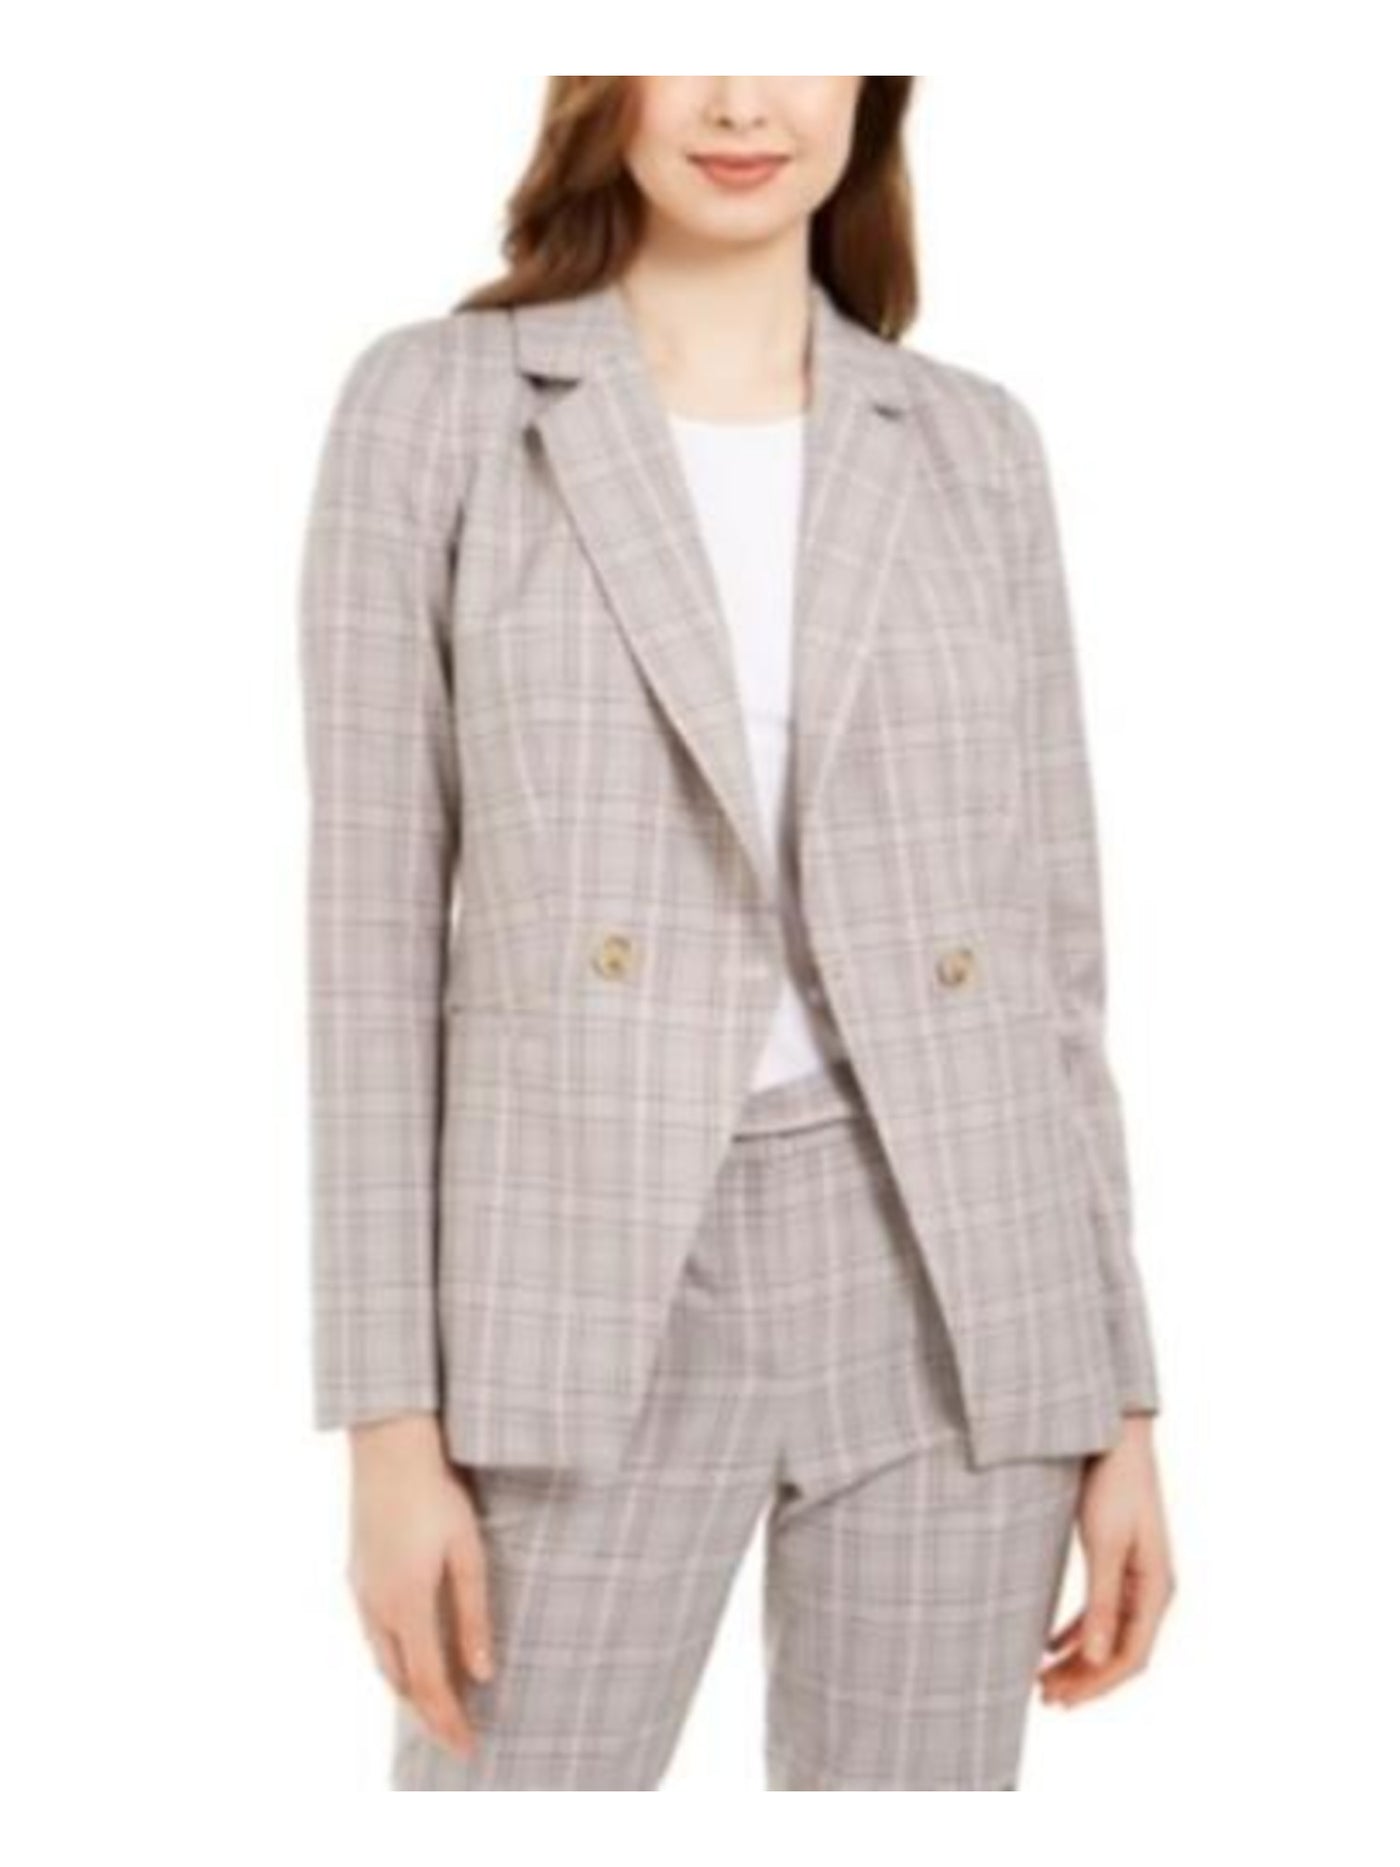 CALVIN KLEIN Womens Gray Pocketed Cutaway Front Double Breasted Plaid Wear To Work Blazer Jacket 0